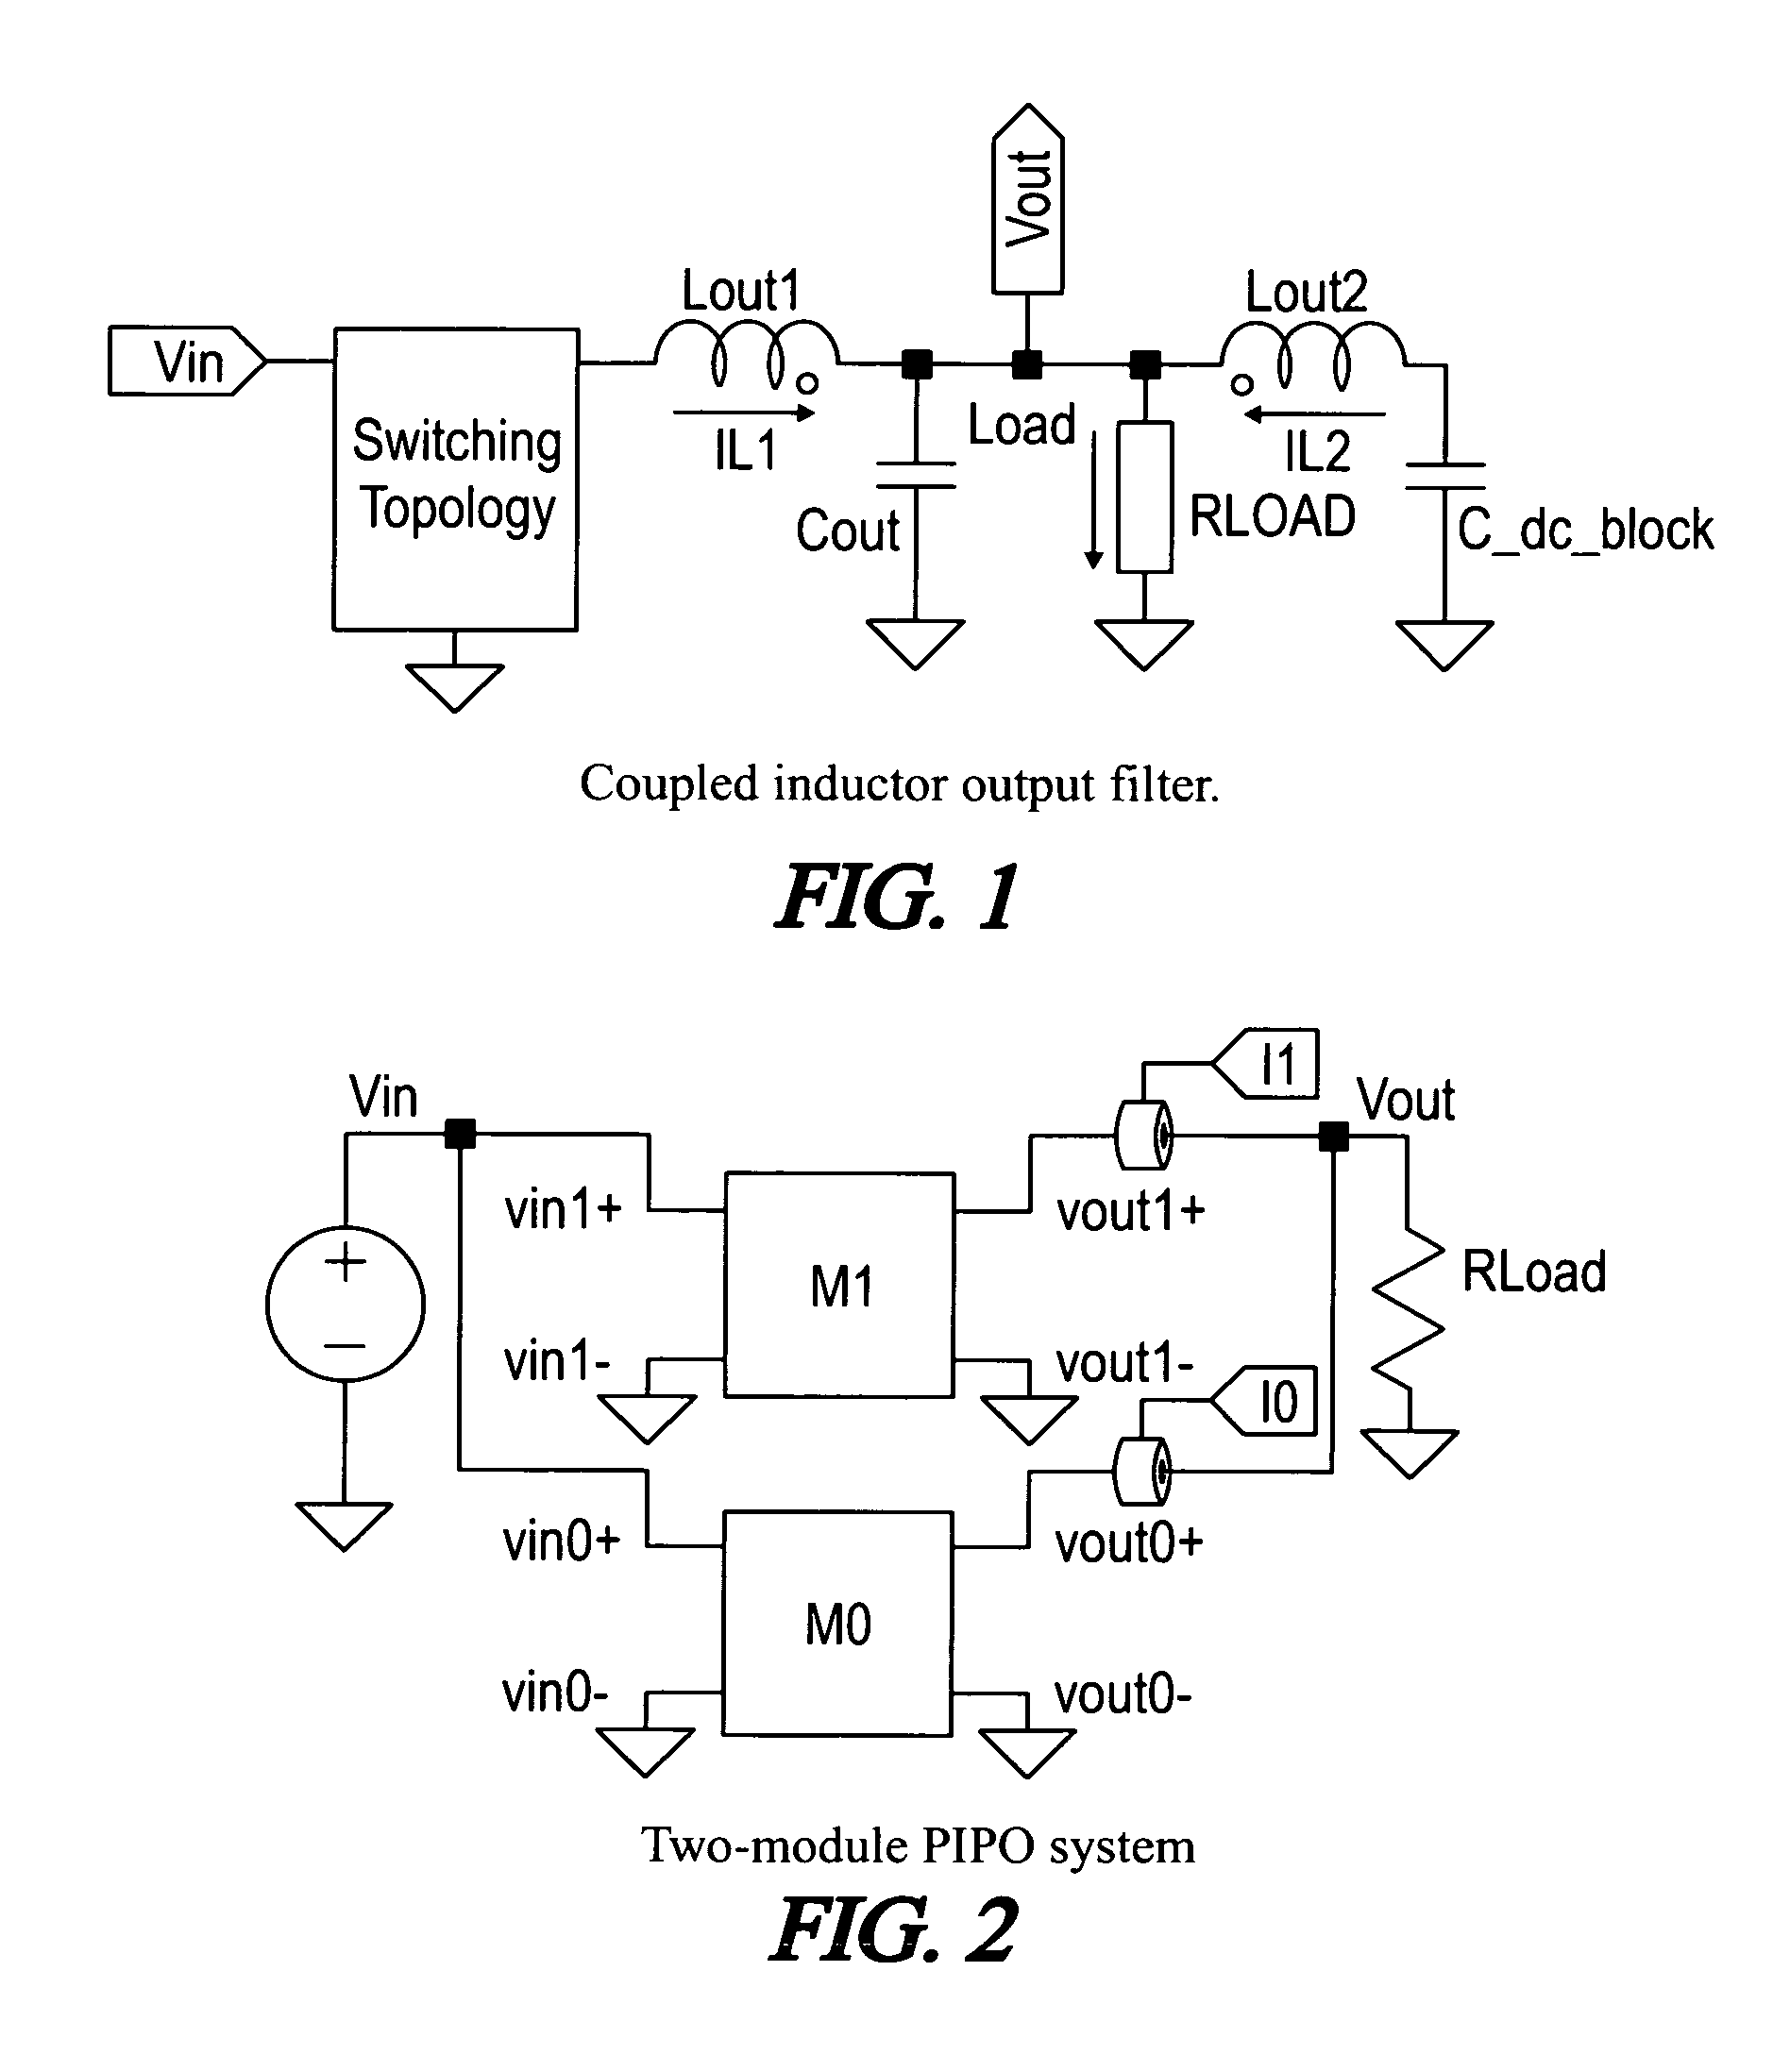 Coupled inductor output filter